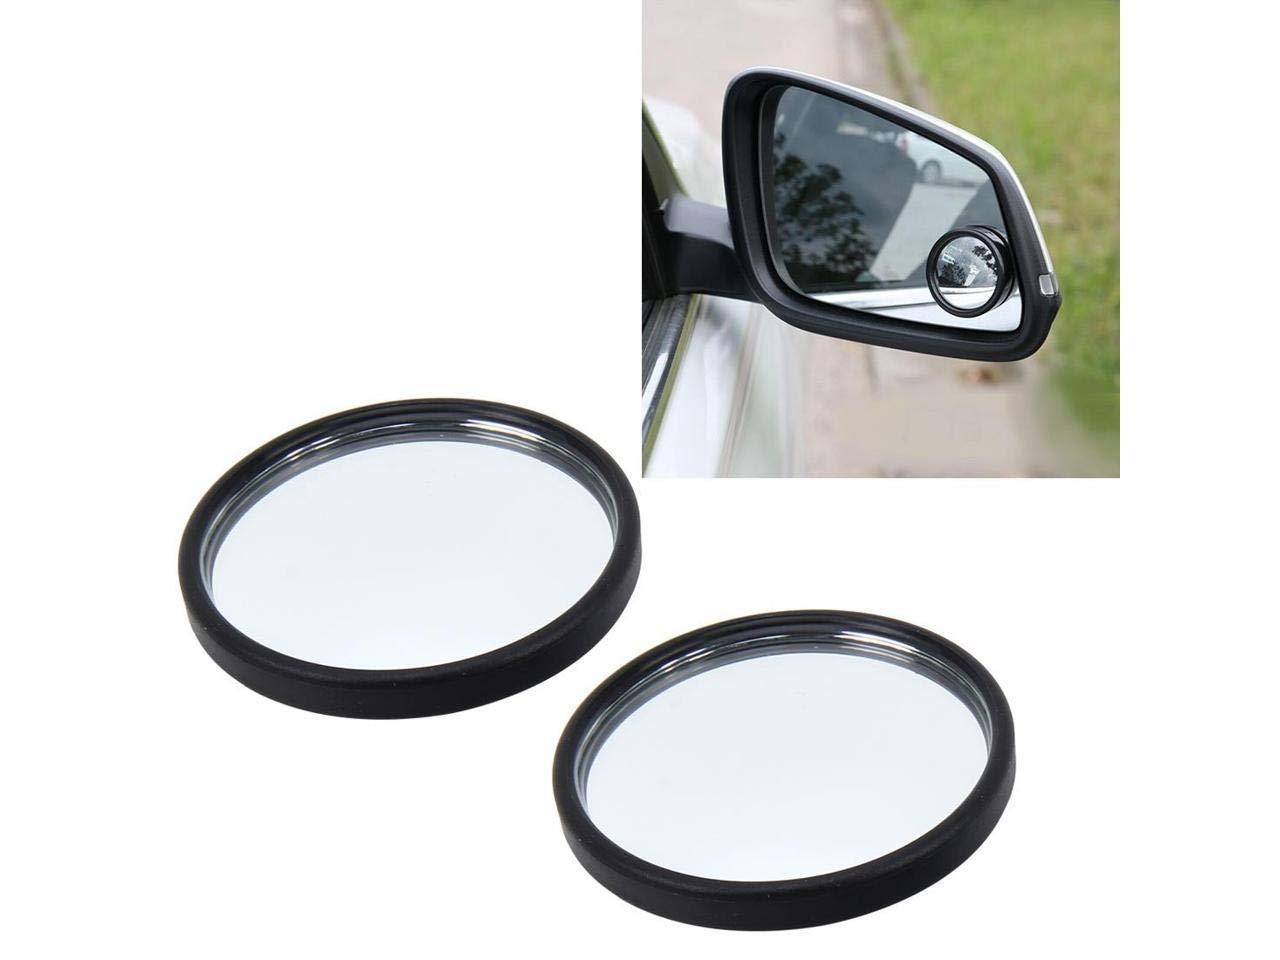 3R 360 Degree Car Wide Angle Round Convex Blind Spot Mirror (2 Pc)